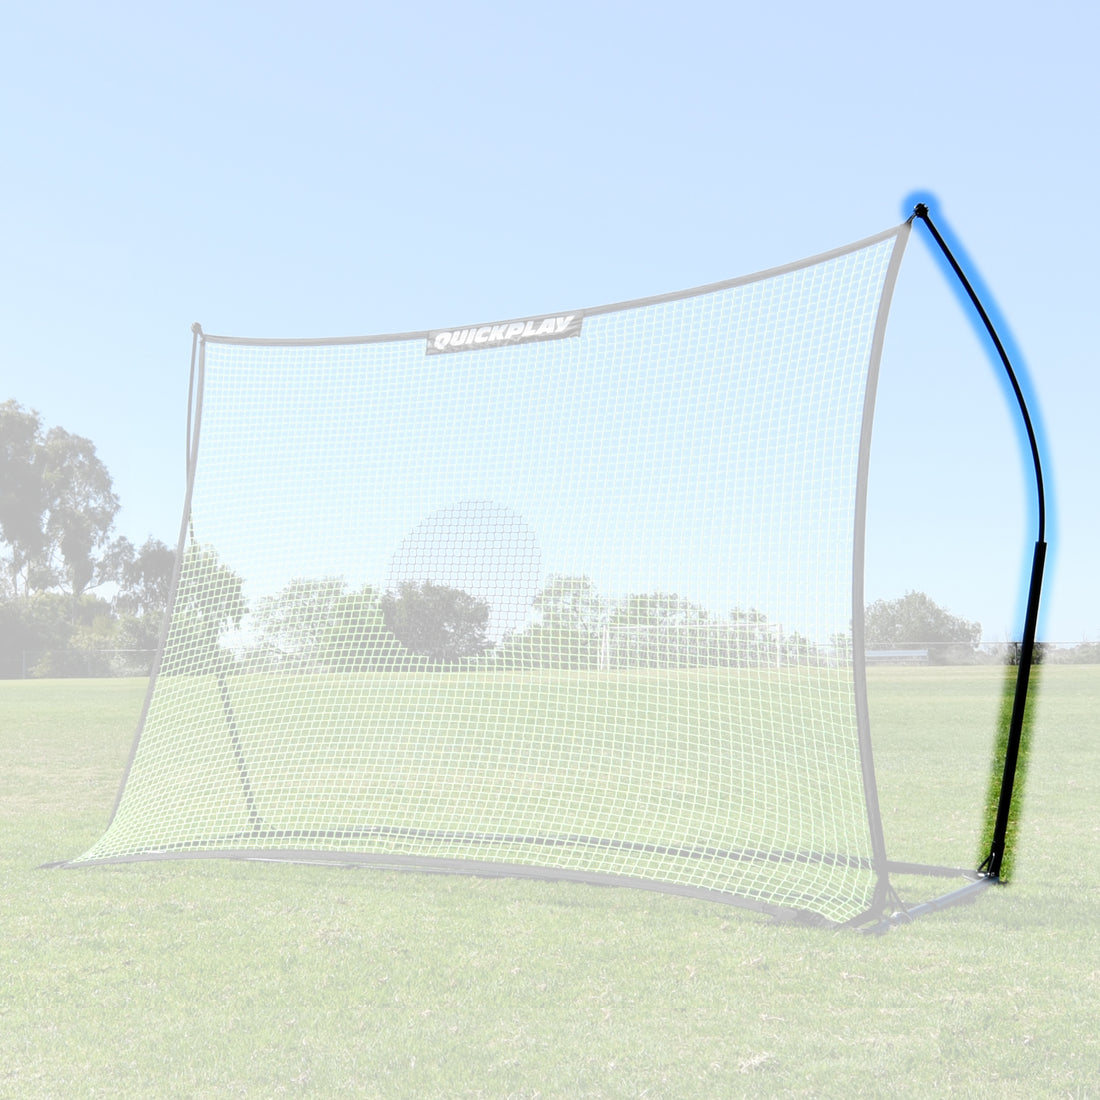 SPARE PART - UPRIGHT - TEKKERS XL (8X6') REBOUNDER - QUICKPLAY UK -